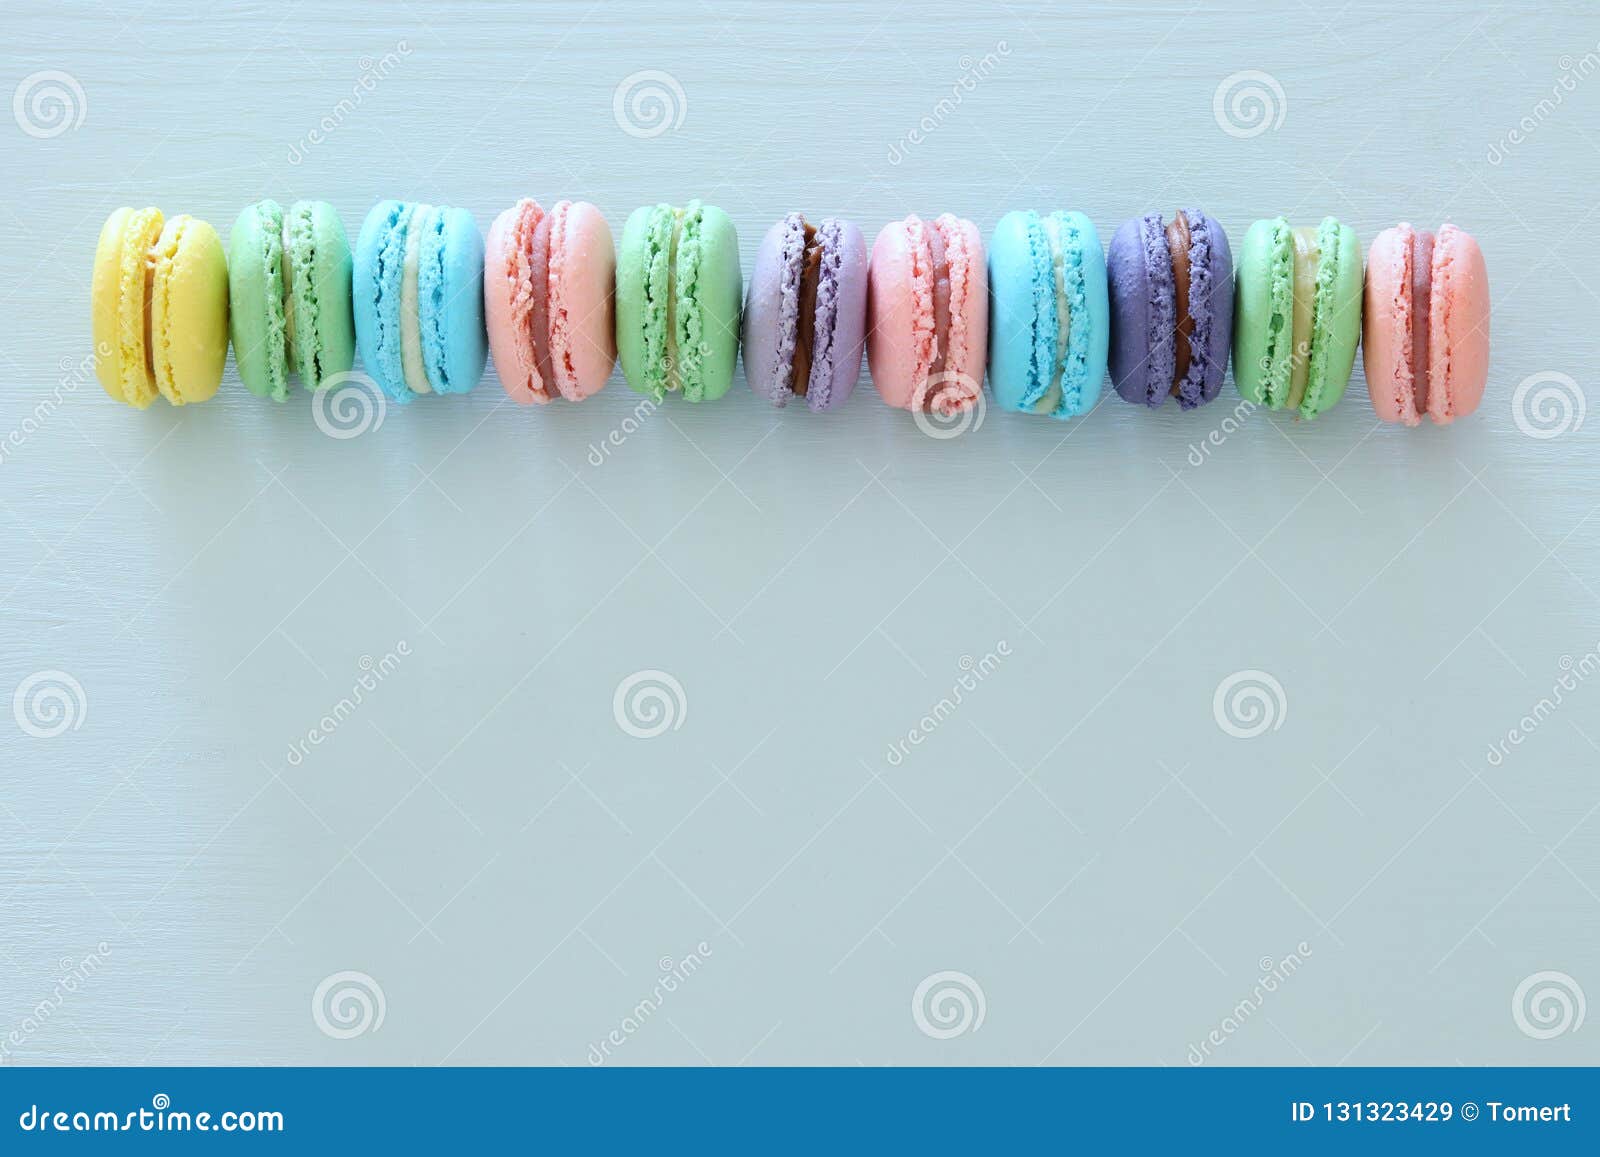 Top View of Colorful Macaron or Macaroon Over Pastel Blue Background ...